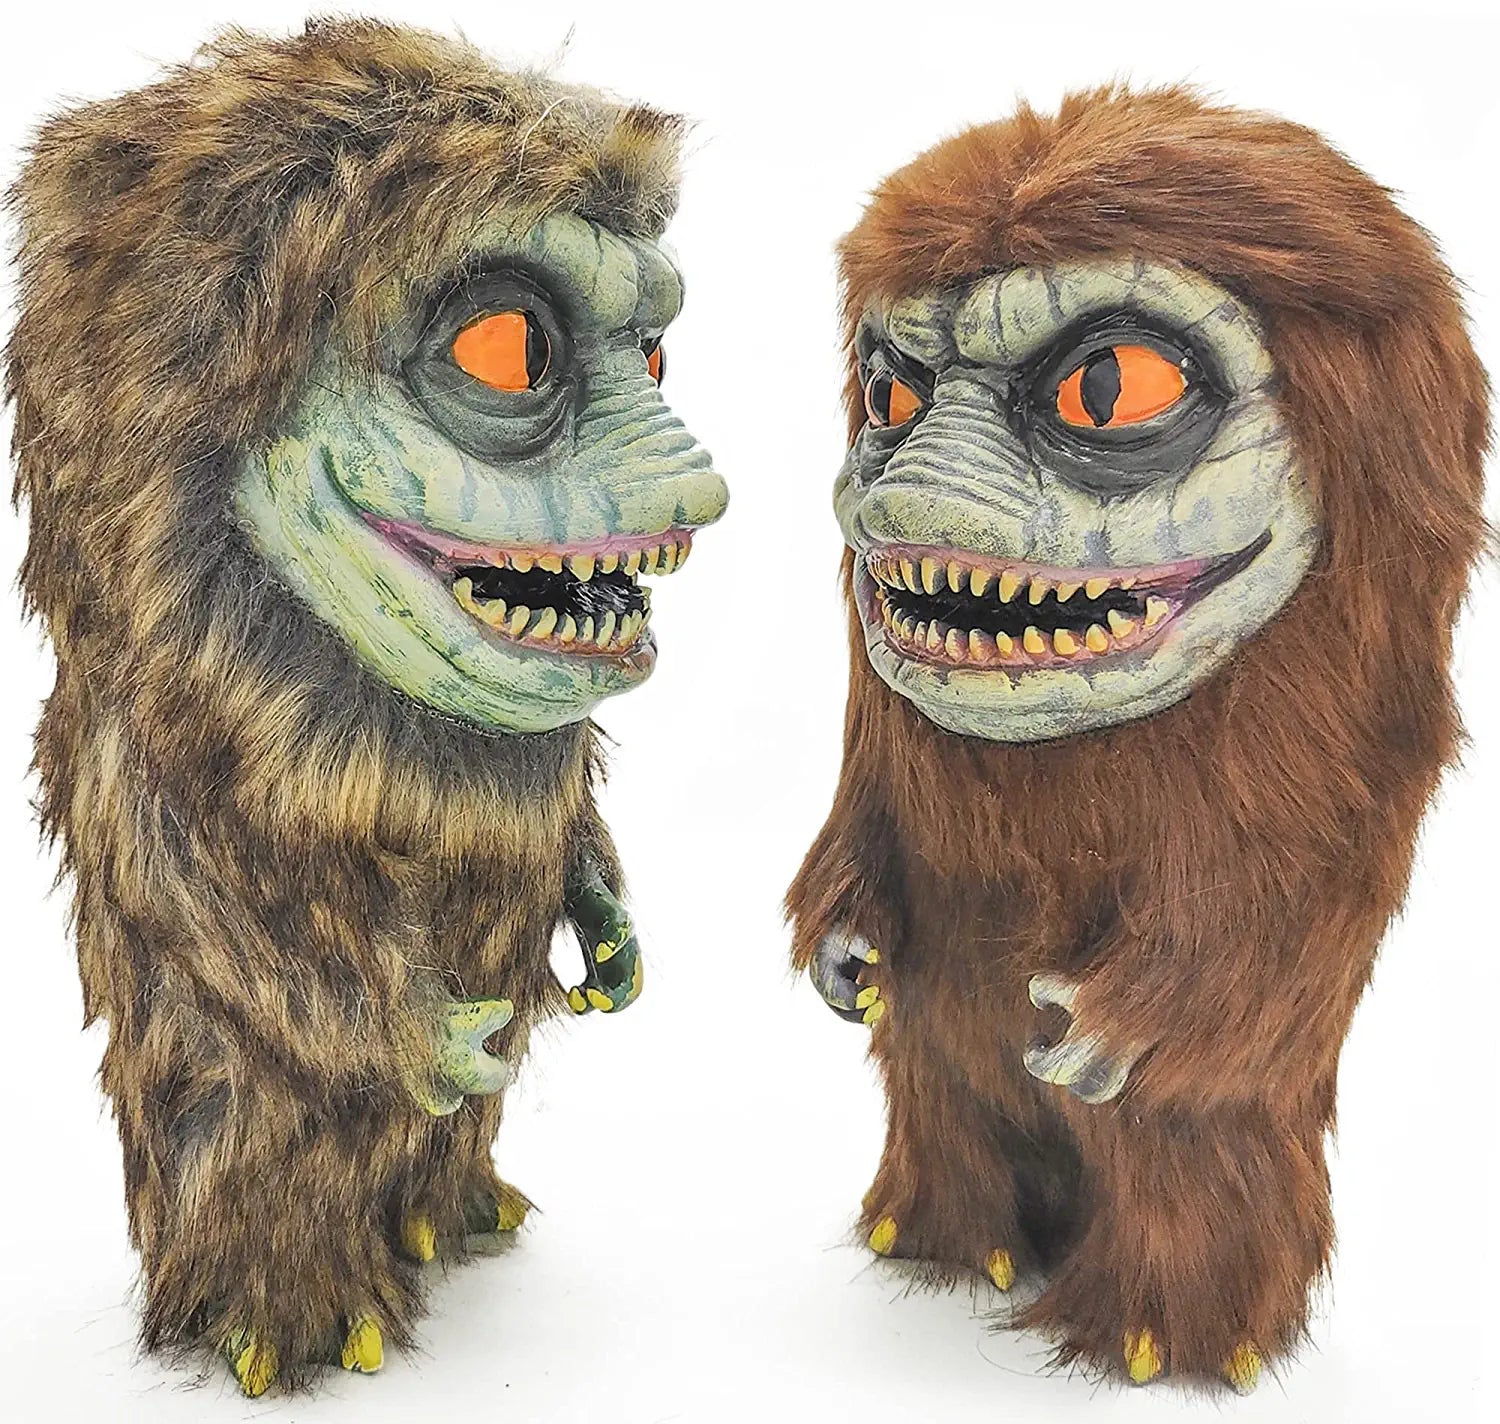 Two critter dolls from the Critters movies facing each other with orange colored eyes.